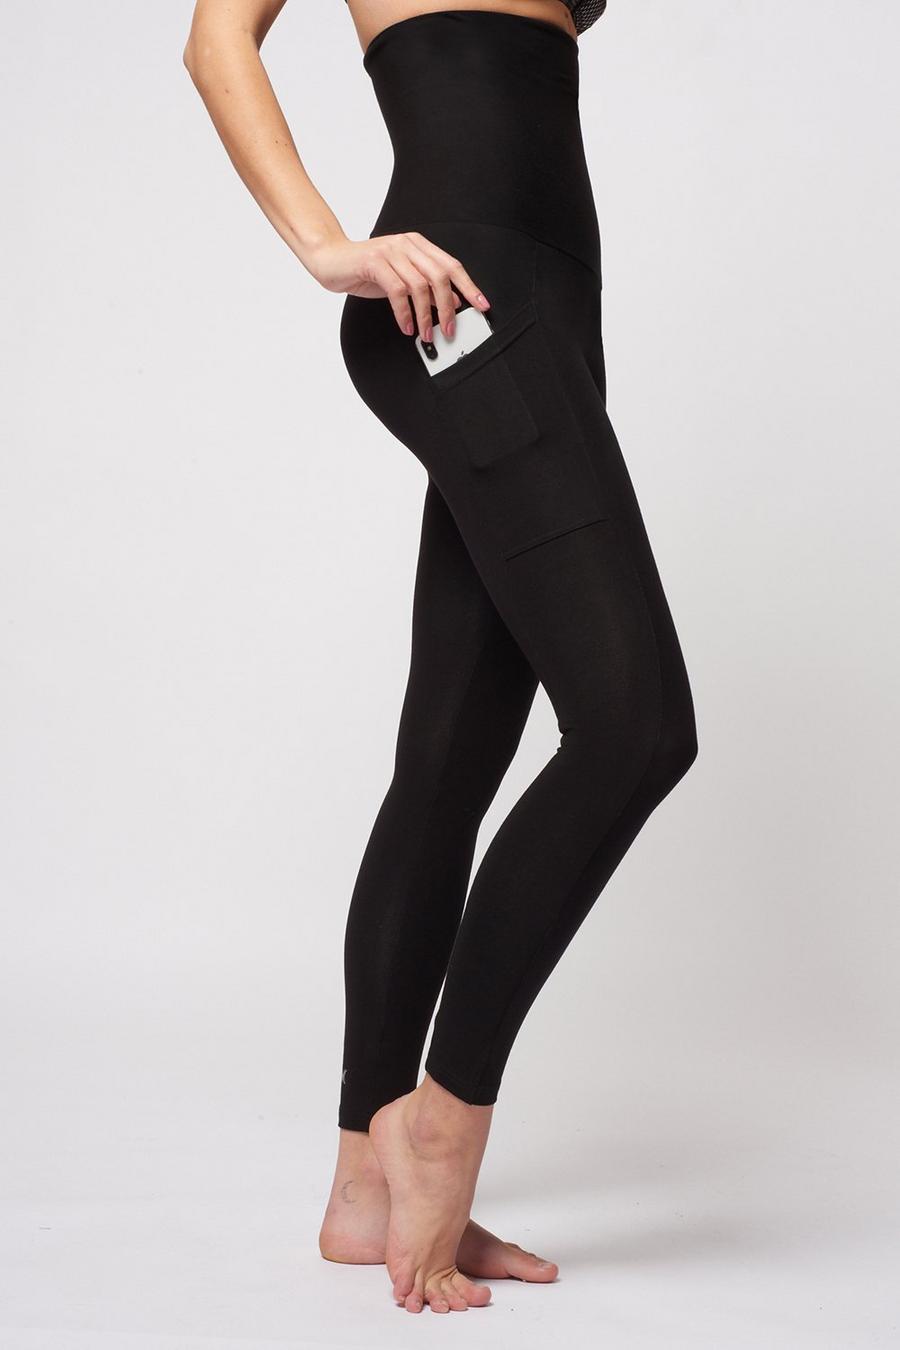 Black Extra Strong Compression Pocket Leggings with High Tummy Control